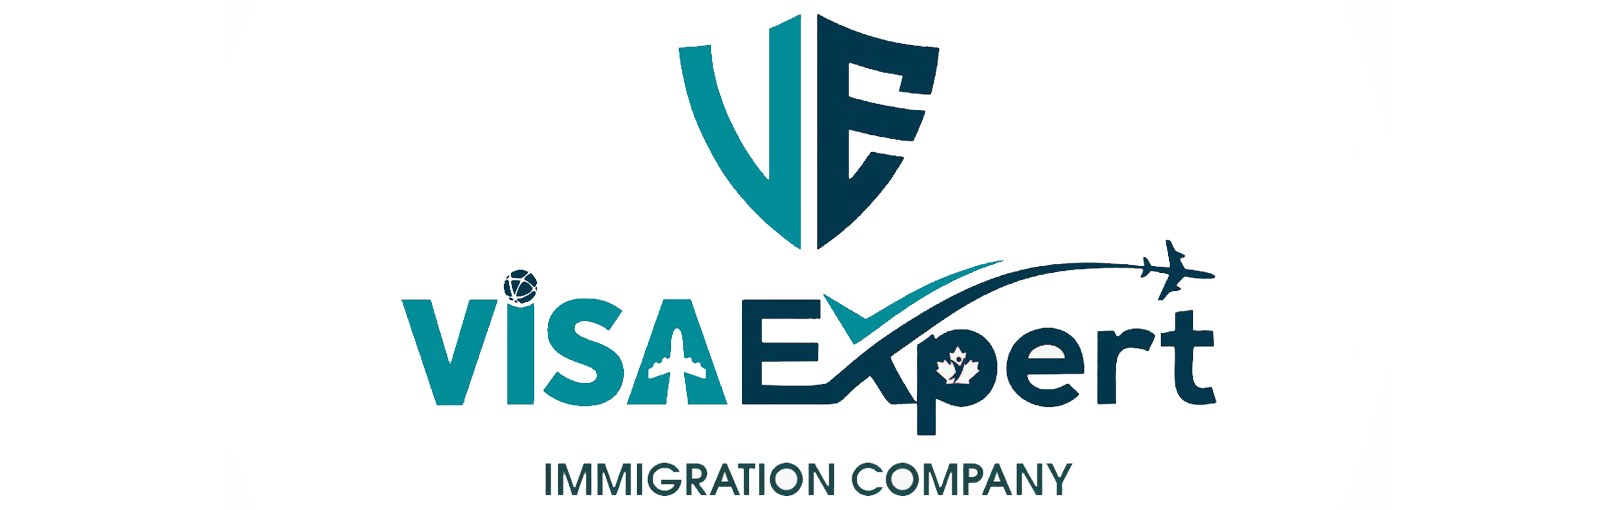 Visa Expert Immigration Company|IT Services|Professional Services